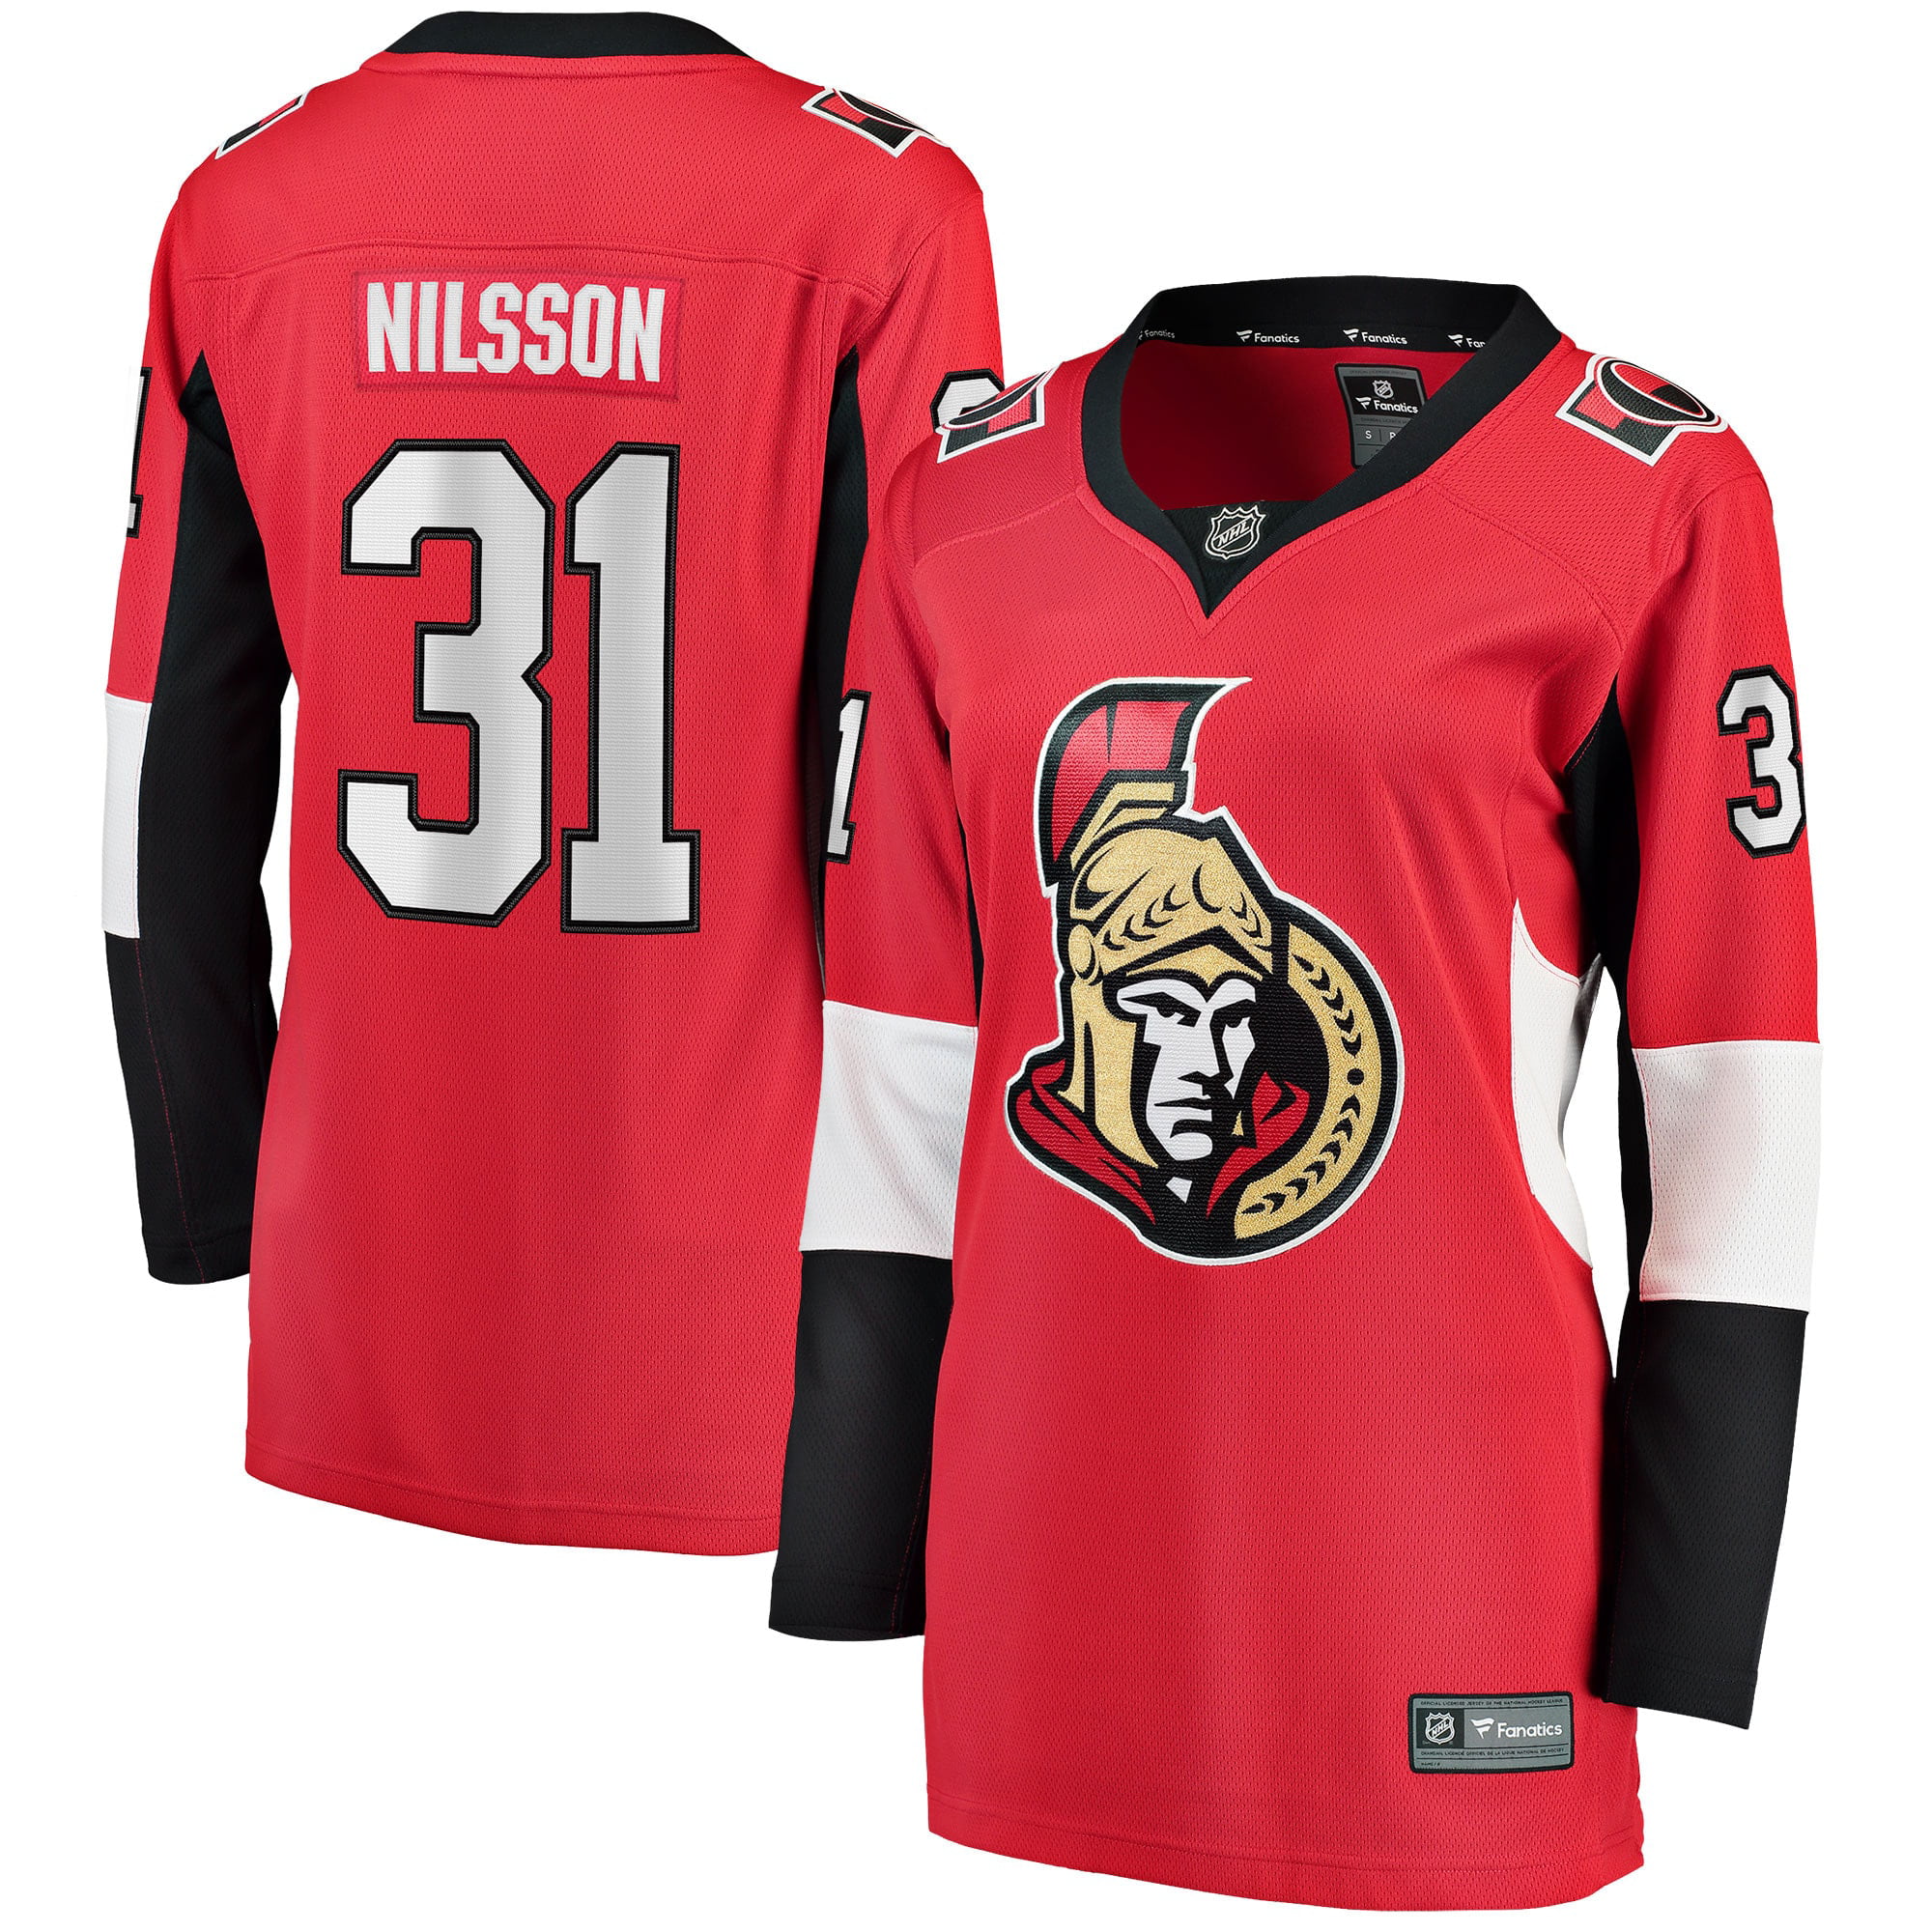 anders nilsson jersey